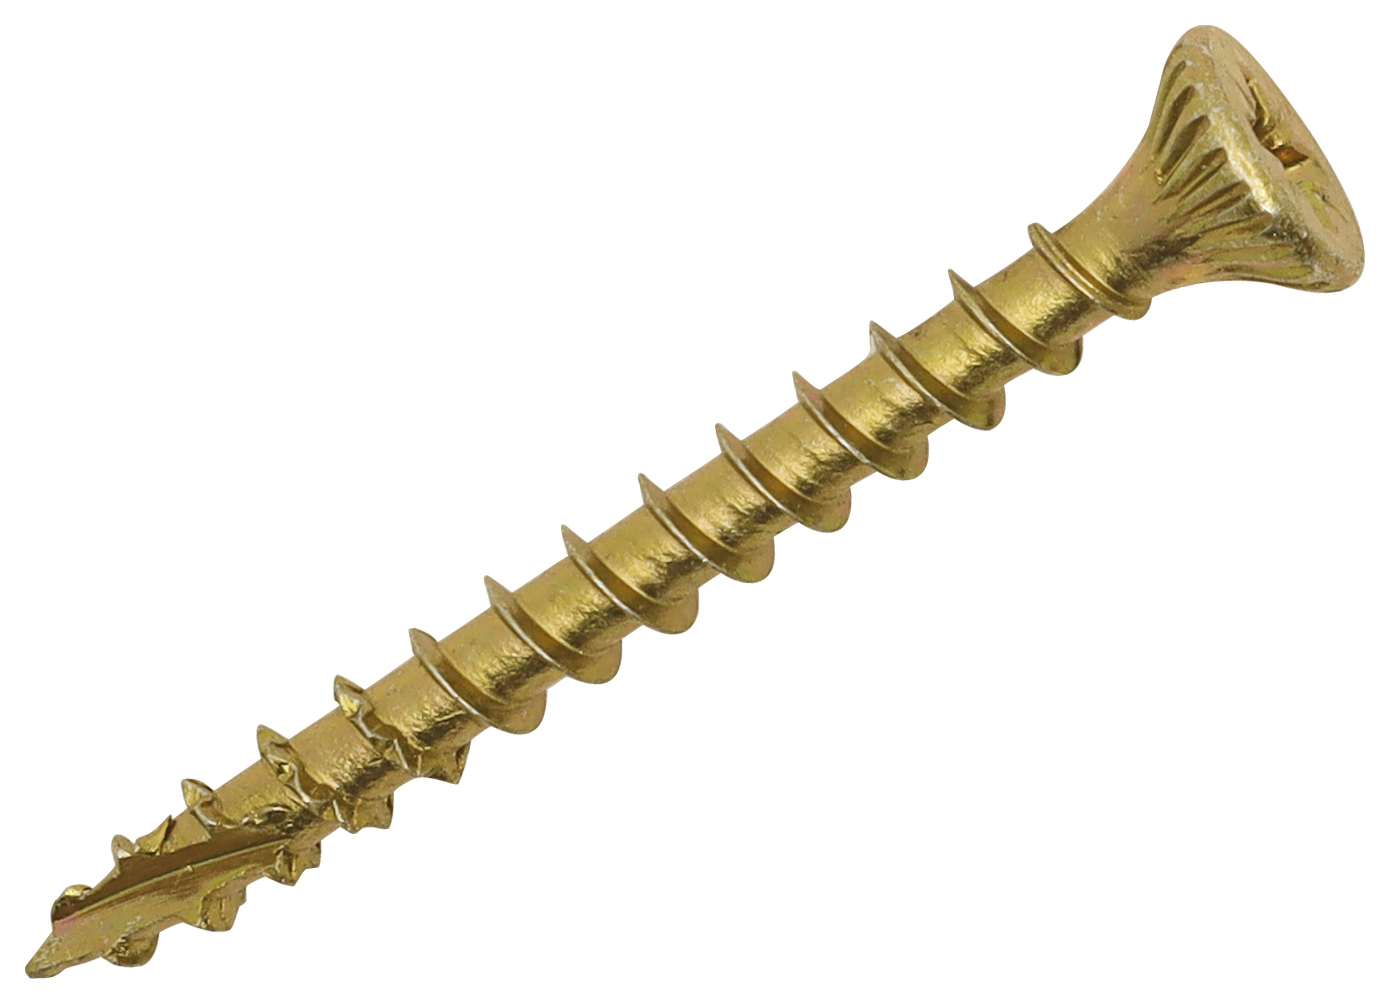 Optimaxx PZ Countersunk Passivated Double Reinforced Wood Screw - 5 x 50mm - Pack of 200